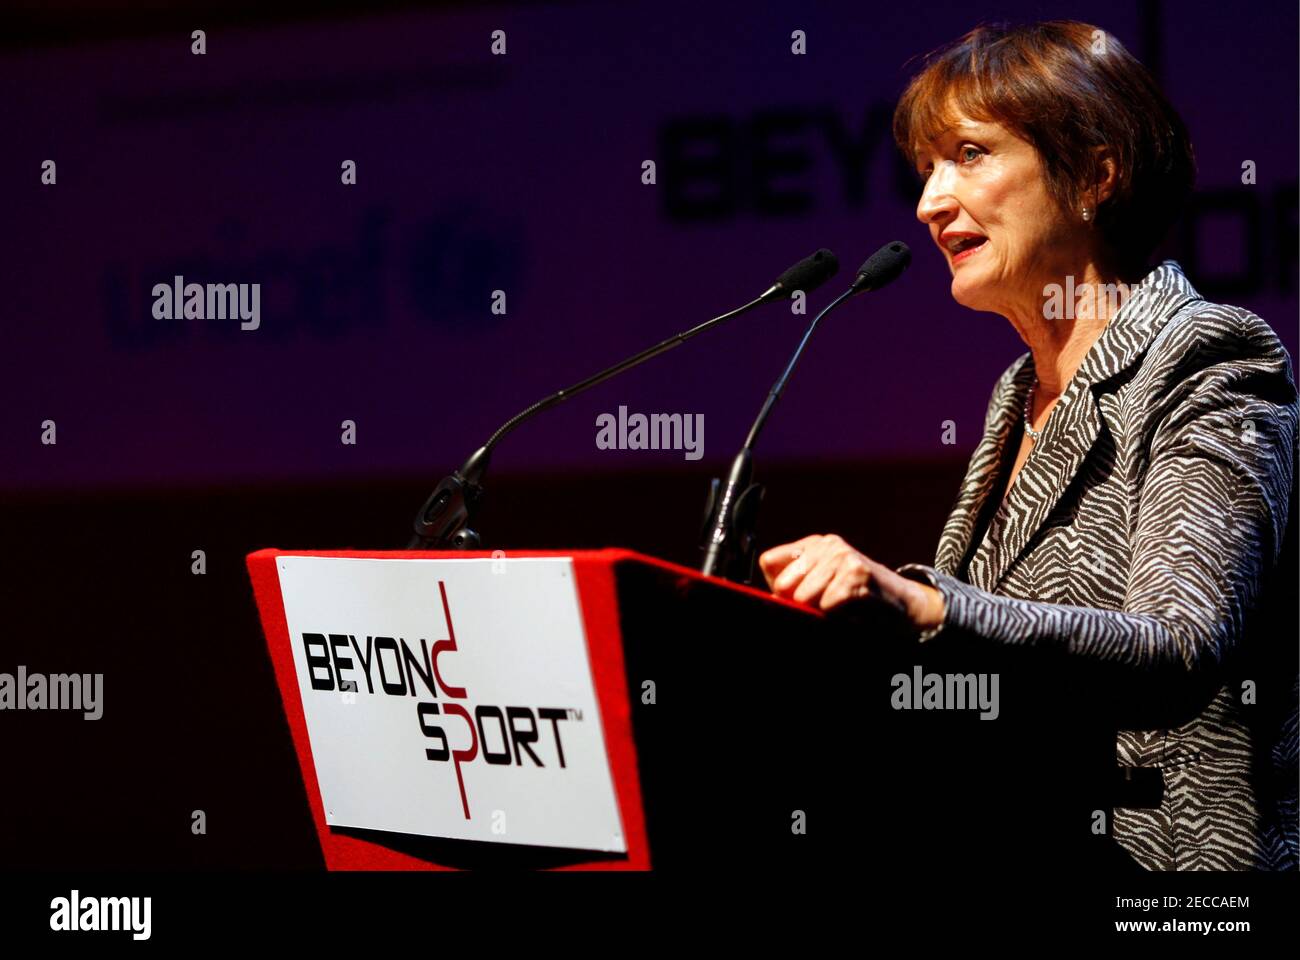 General Sport - Beyond Sport Summit & Awards - Grange St. Pauls Hotel, 10 Godliman Street, London EC4V 5AJ - 9/7/09  Minister for the Cabinet Office and Olympics and London Paymaster General Tessa Jowell MP  Mandatory Credit: Action Images / John Sibley  Livepic Stock Photo